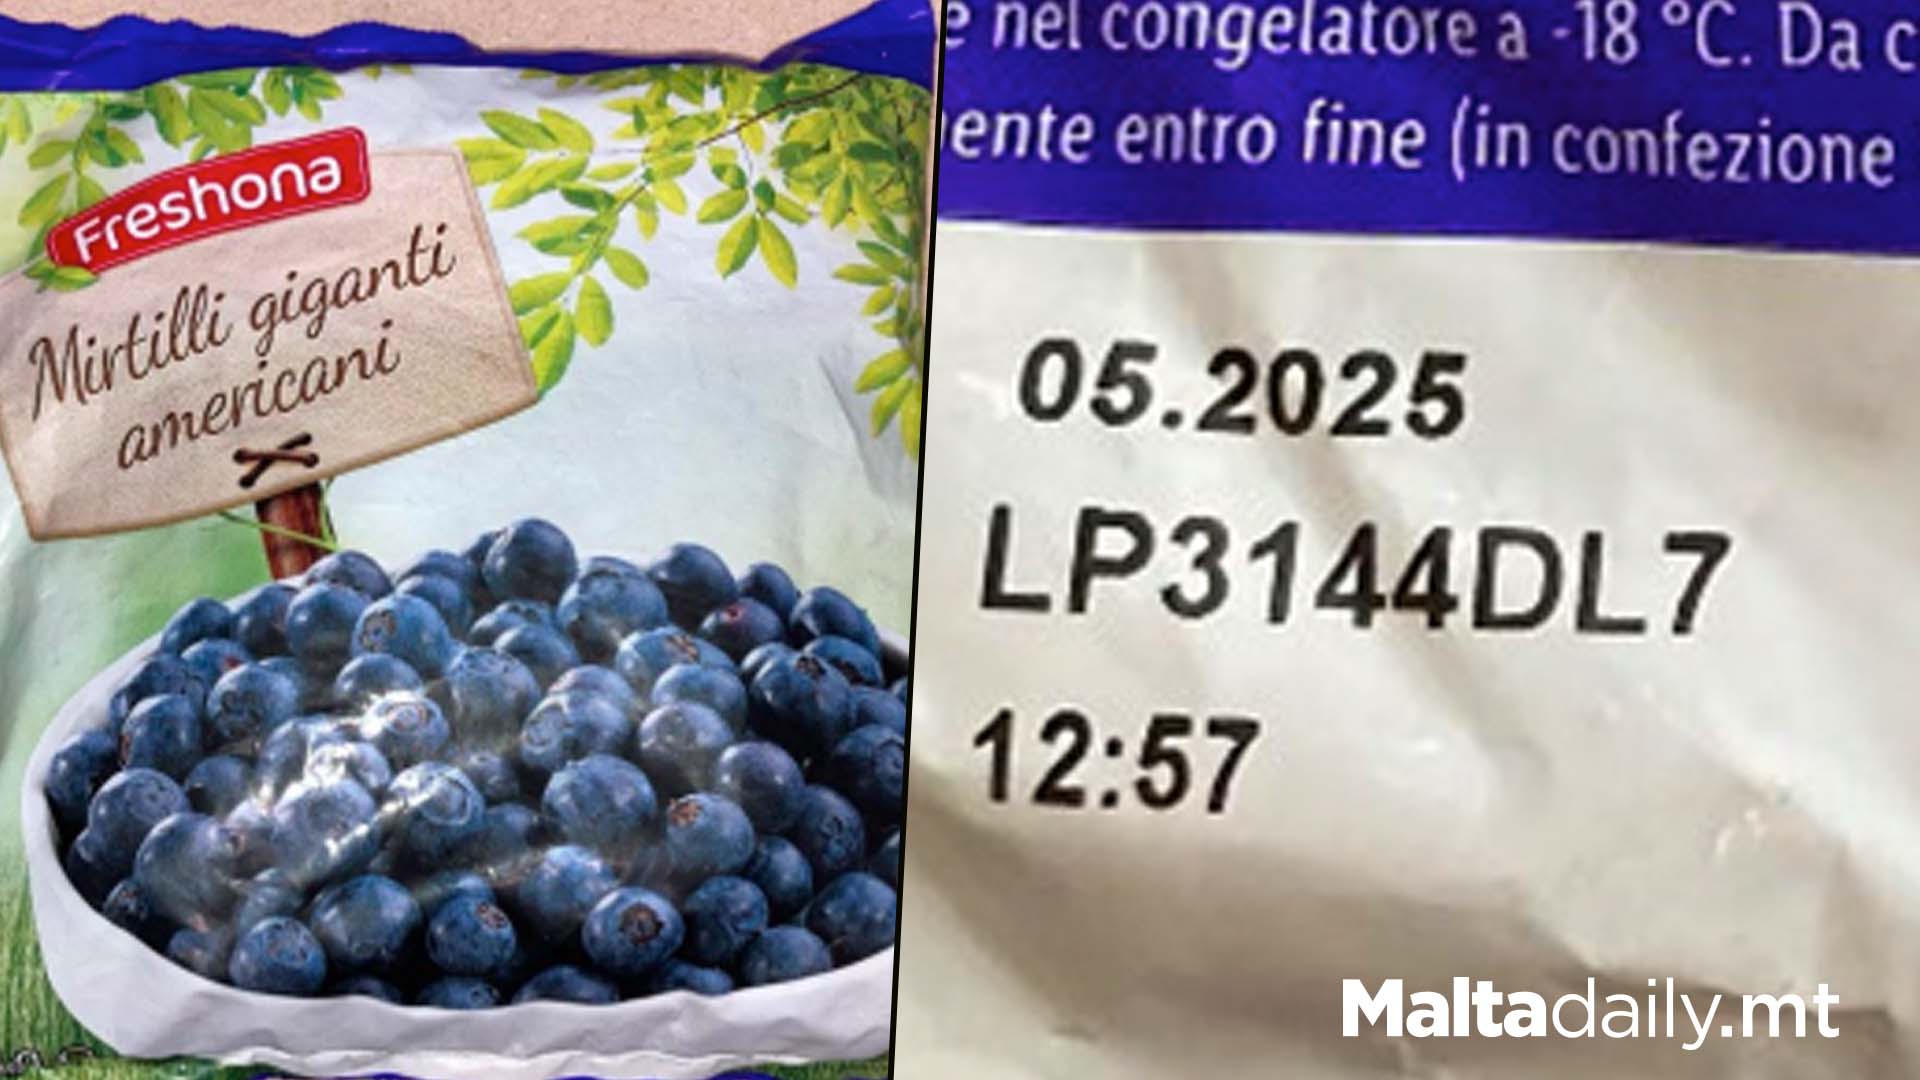 Freshen Blueberries Batch Potentially Carrying Norovirus